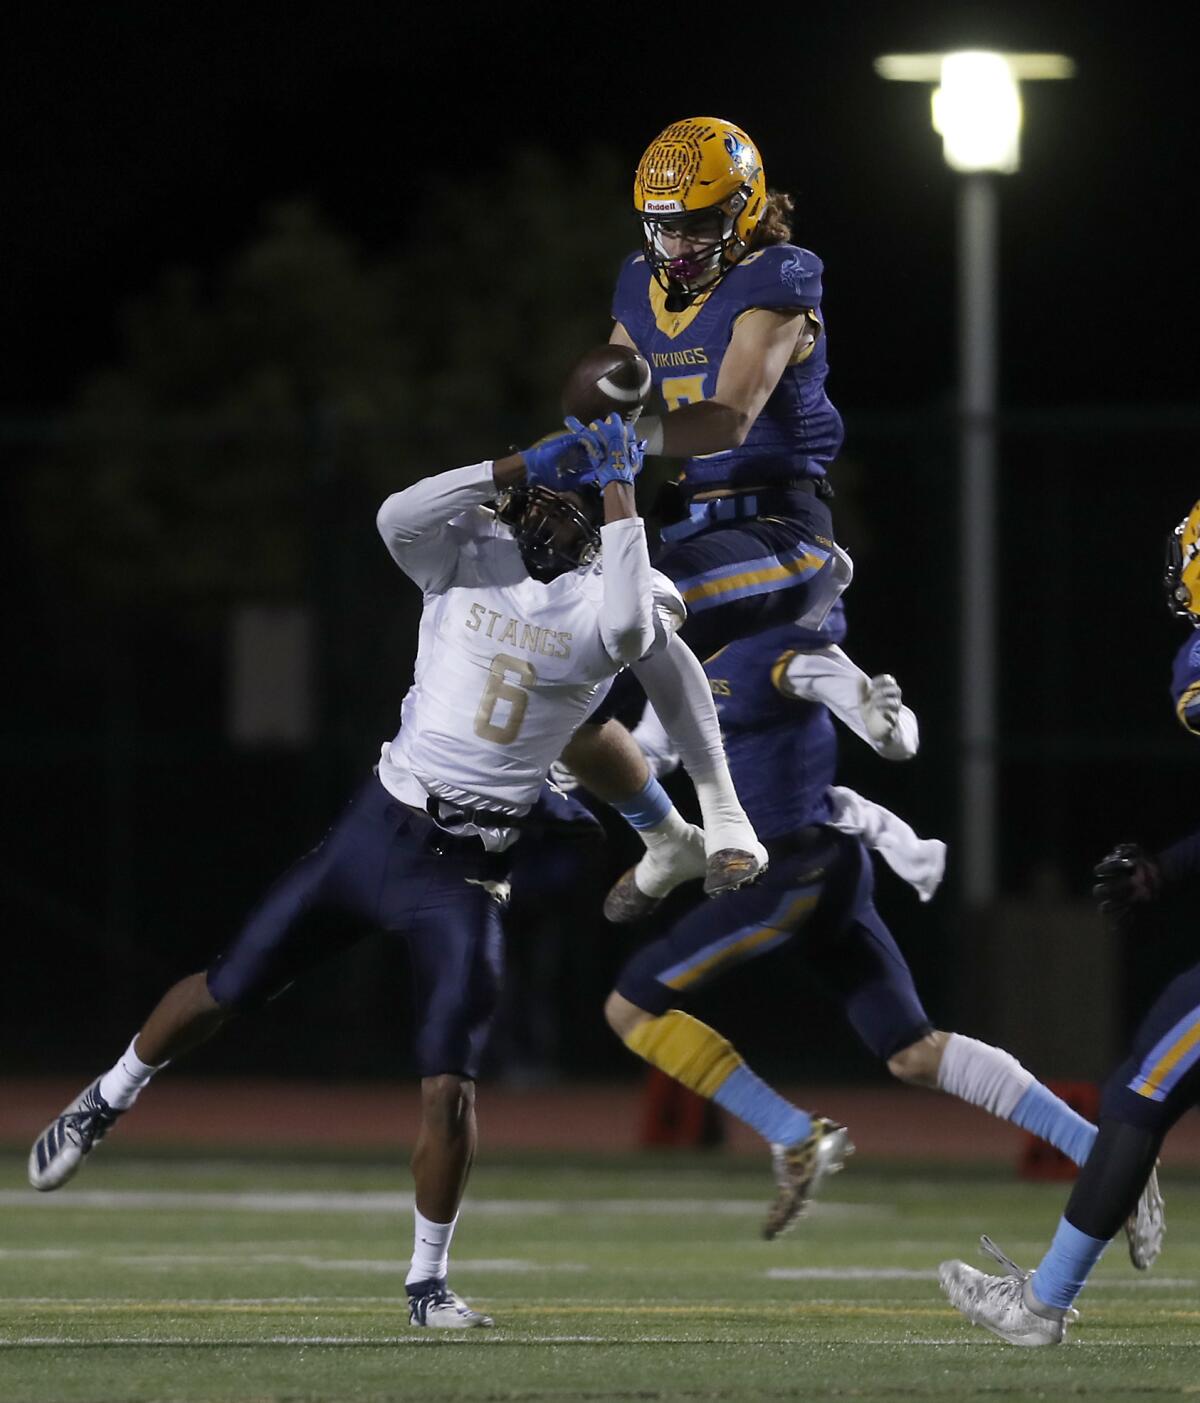 Marina's Dane Brenton, top, intercepts the ball against Muir's John Humphrey in the CIF Southern Section Division 11 title game on Friday at Westminster High.